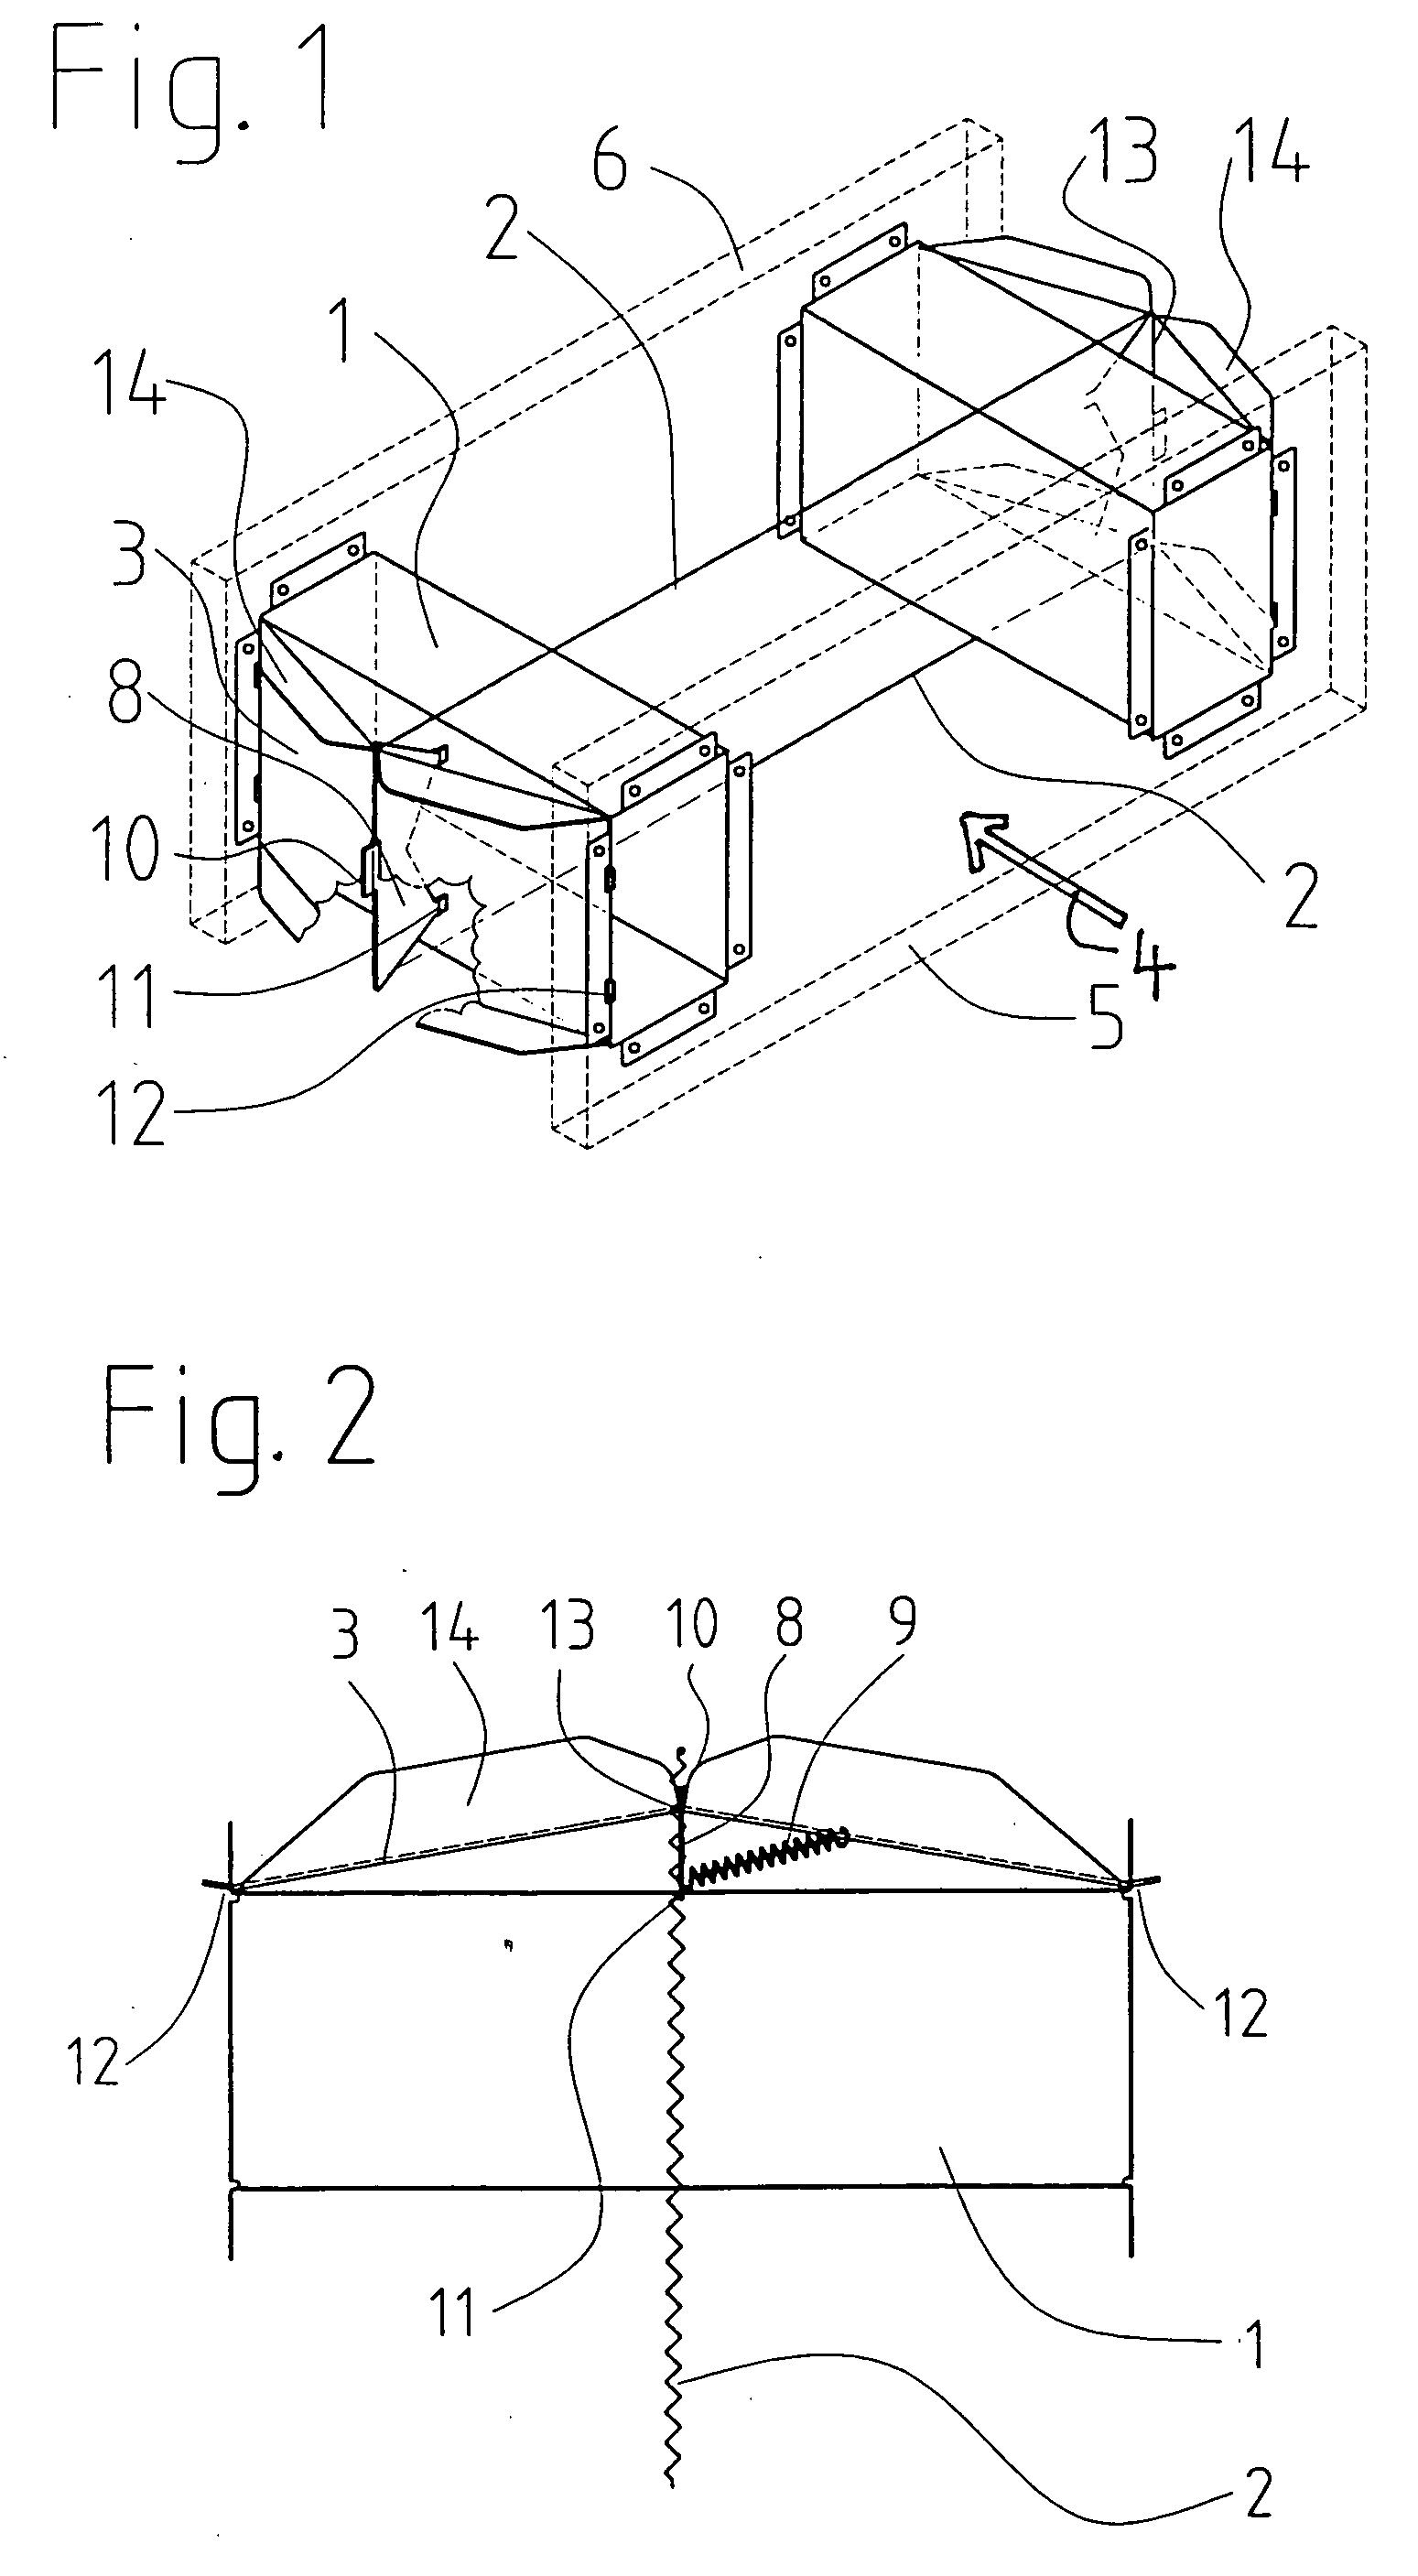 Vehicle impact attenuation device